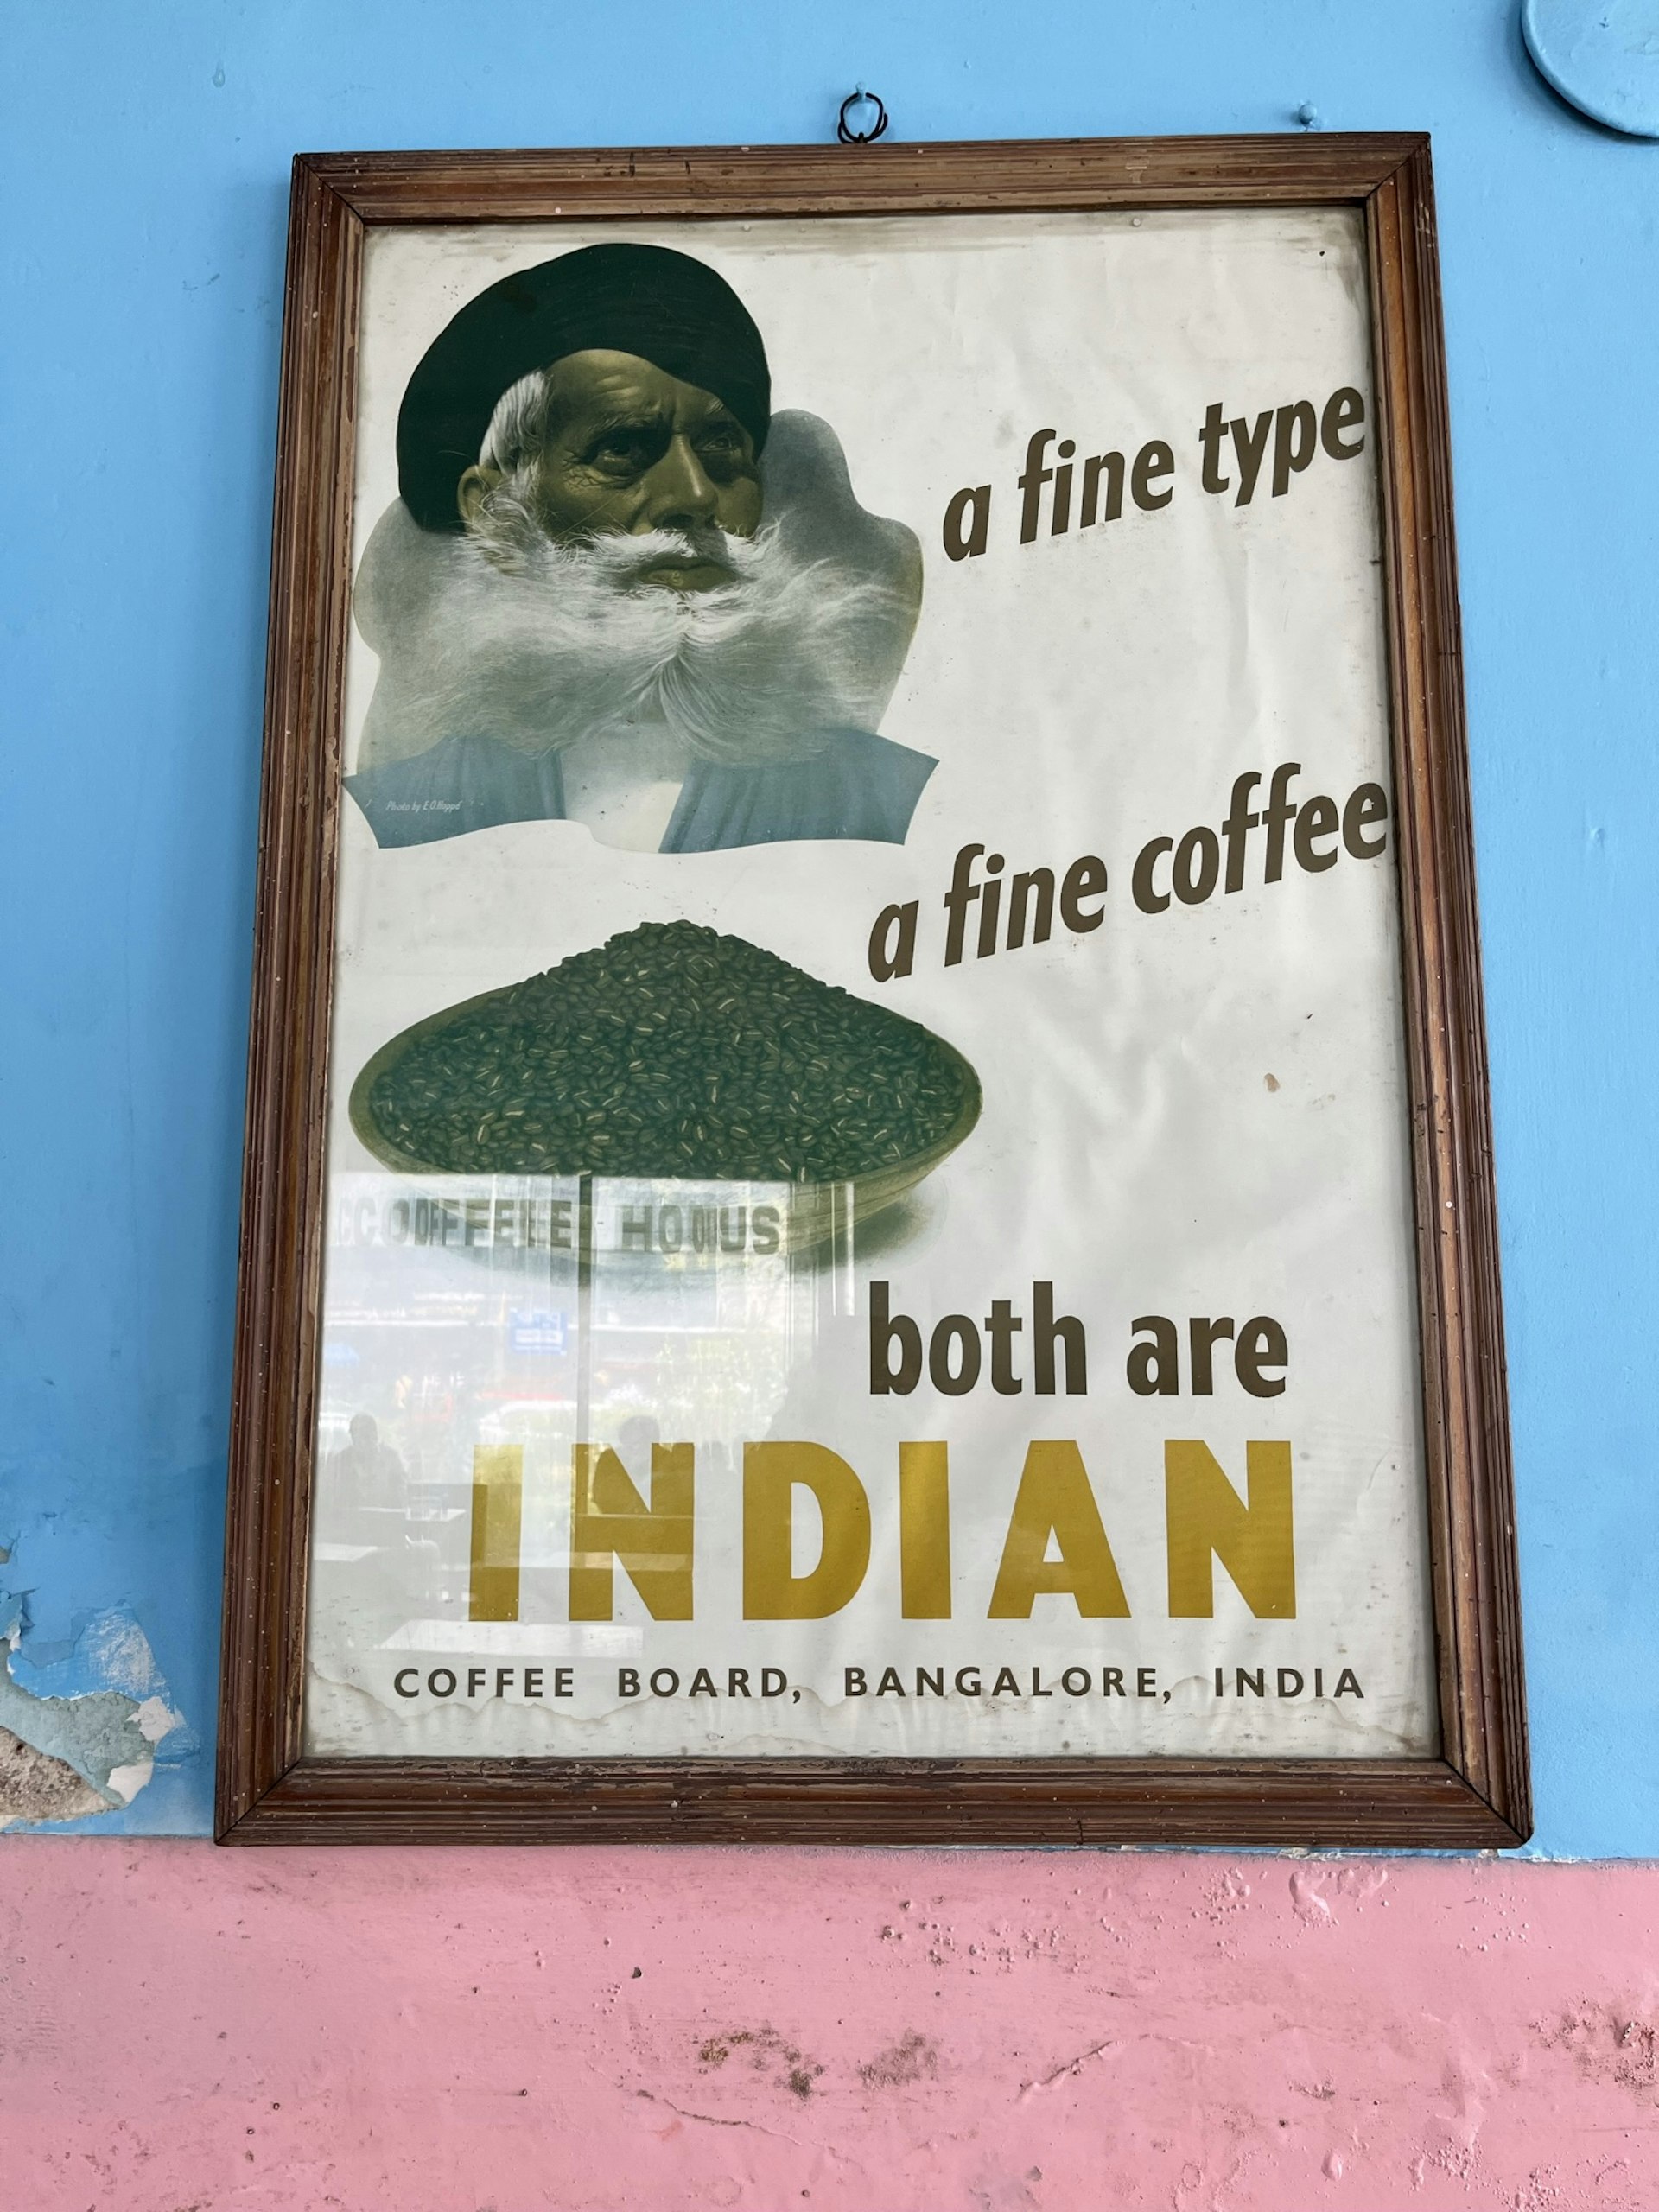 A framed poster advertising Indian coffee mounted on the walls of a coffee house